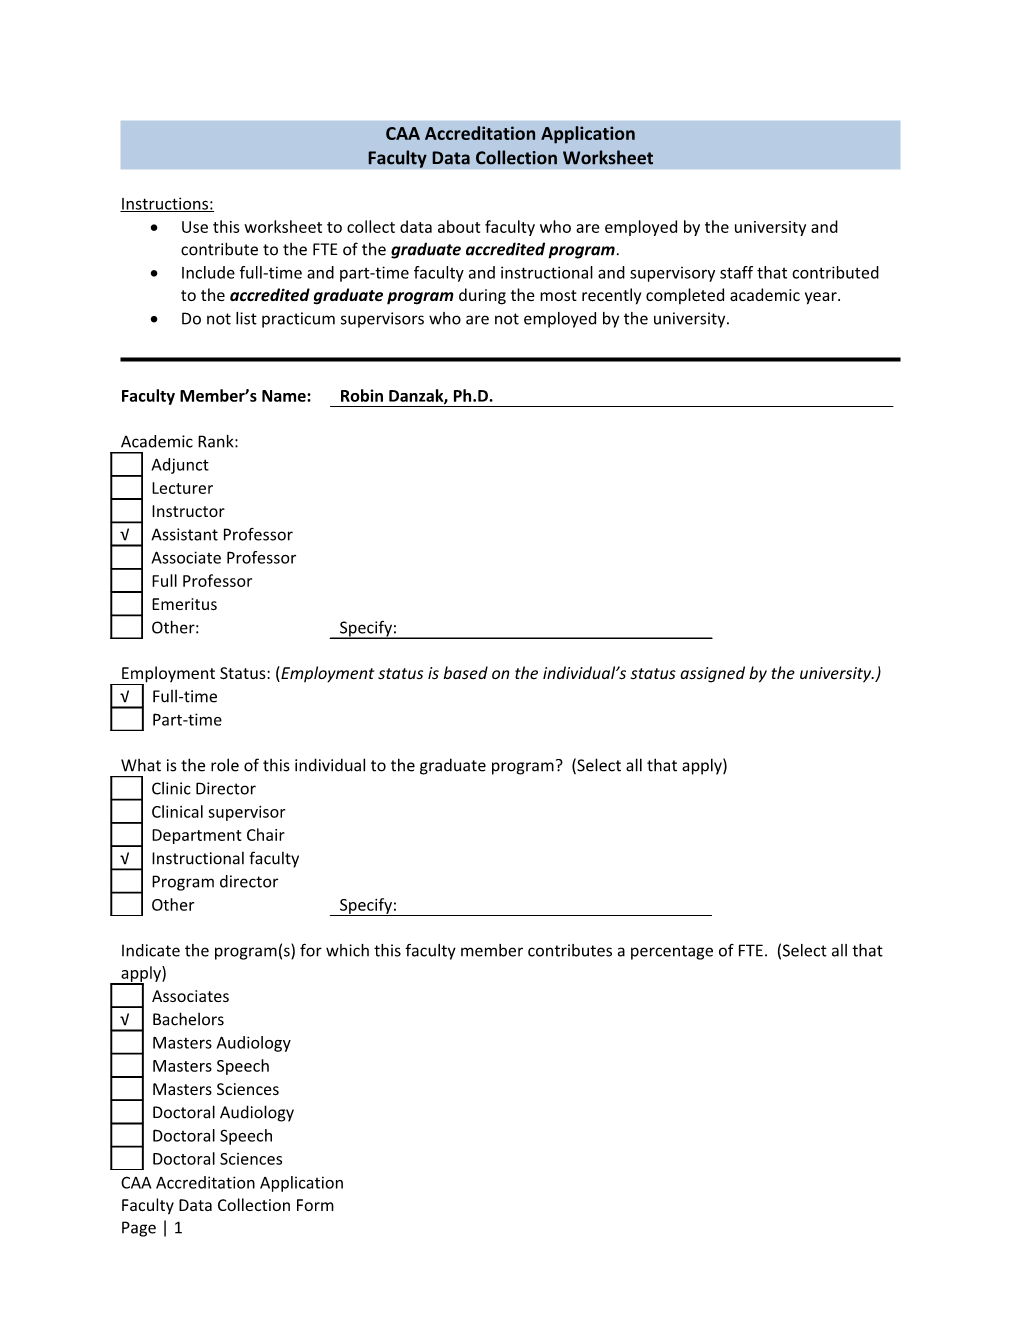 CAA Accreditation Application: Faculty Data Collection Worksheet